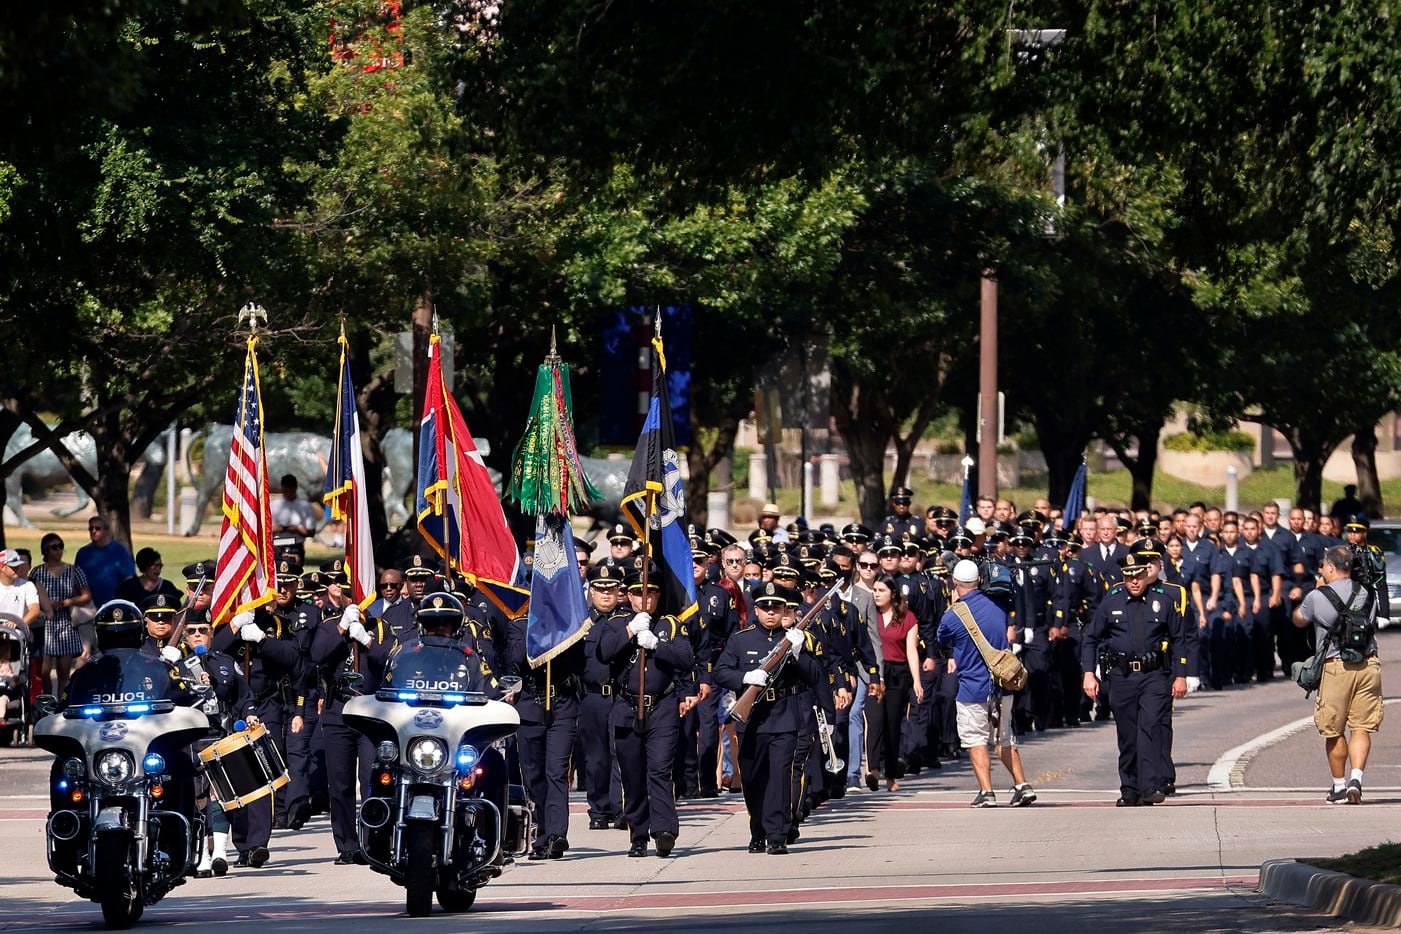 A procession of Dallas Police officers marches up Young Street to the 2021 Police Memorial Service at the DPD Memorial in downtown Dallas, Wednesday, July 7, 2021. It was the fifth anniversary of the July 7th ambush and special recognition was given to those officers who were killed. (Tom Fox/The Dallas Morning News)